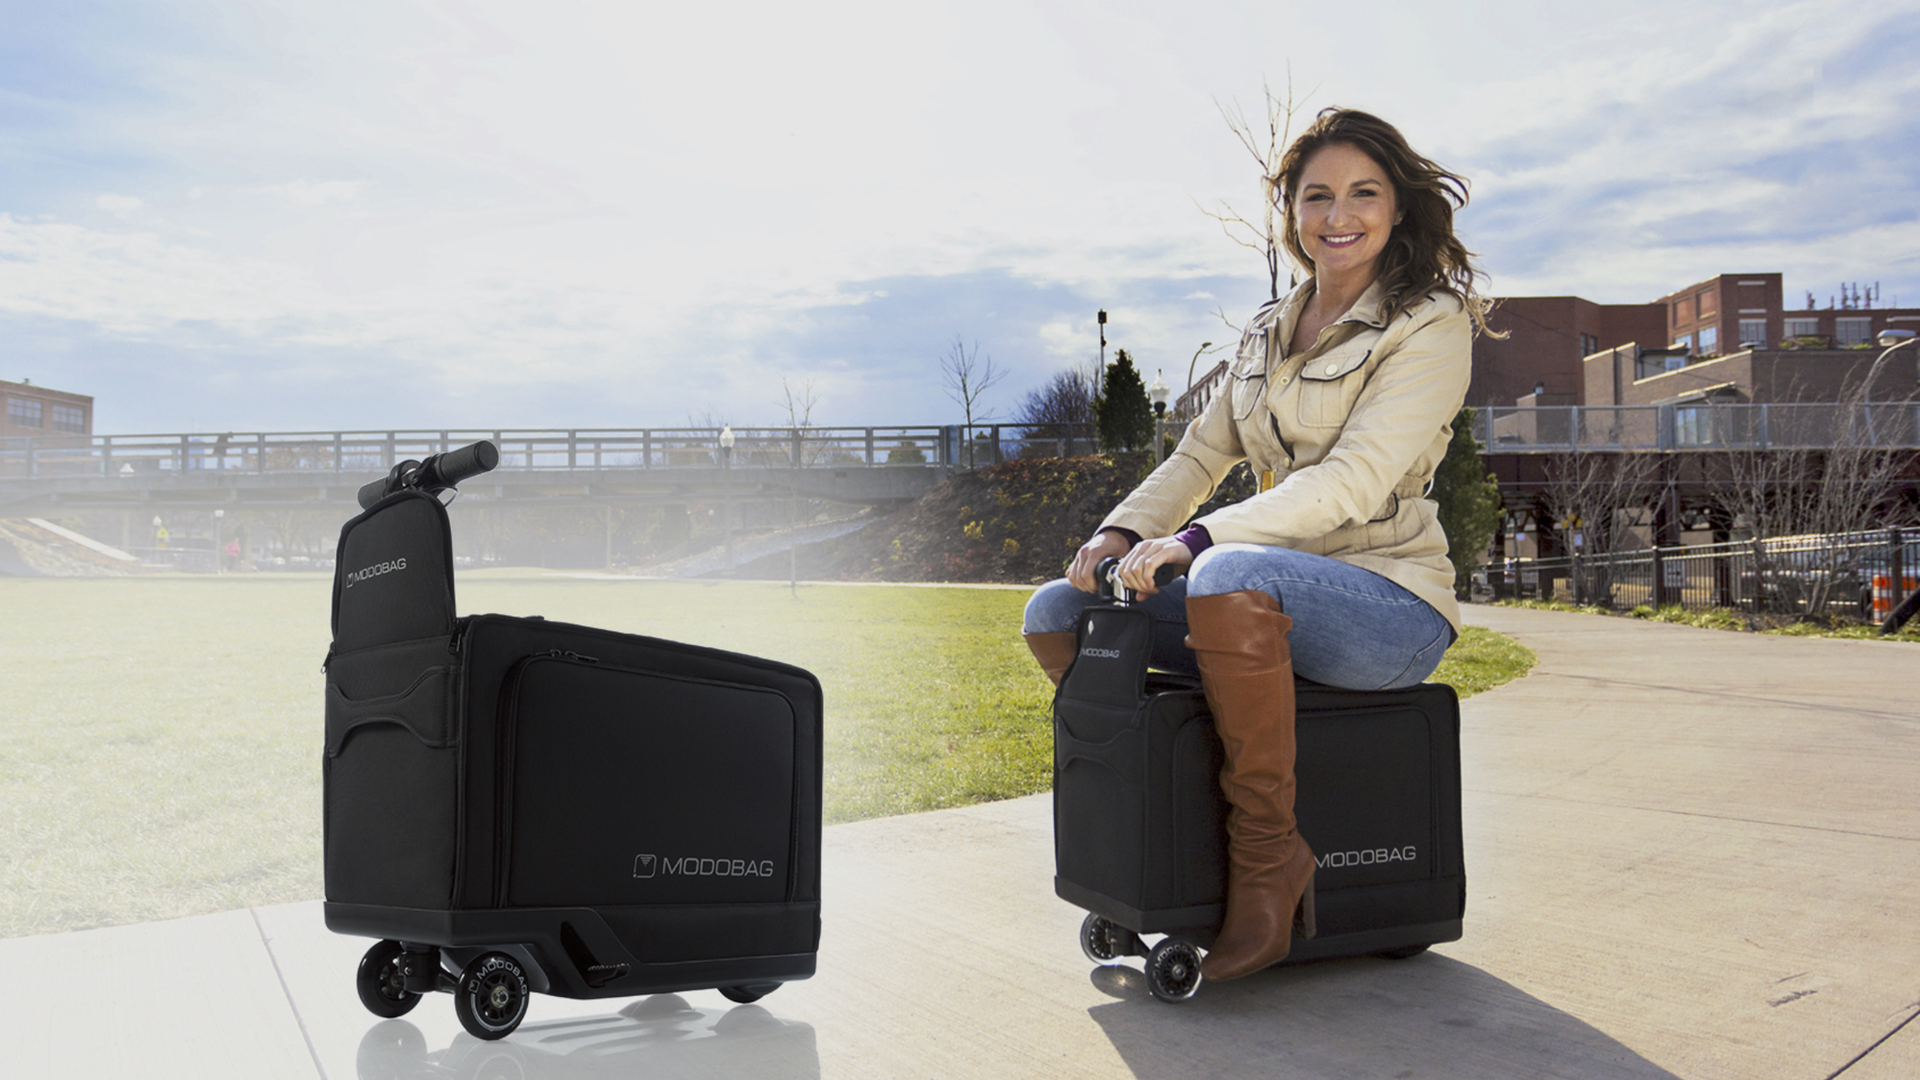 Hearing impaired Medical logic The best smart luggage products you can buy - Android Authority